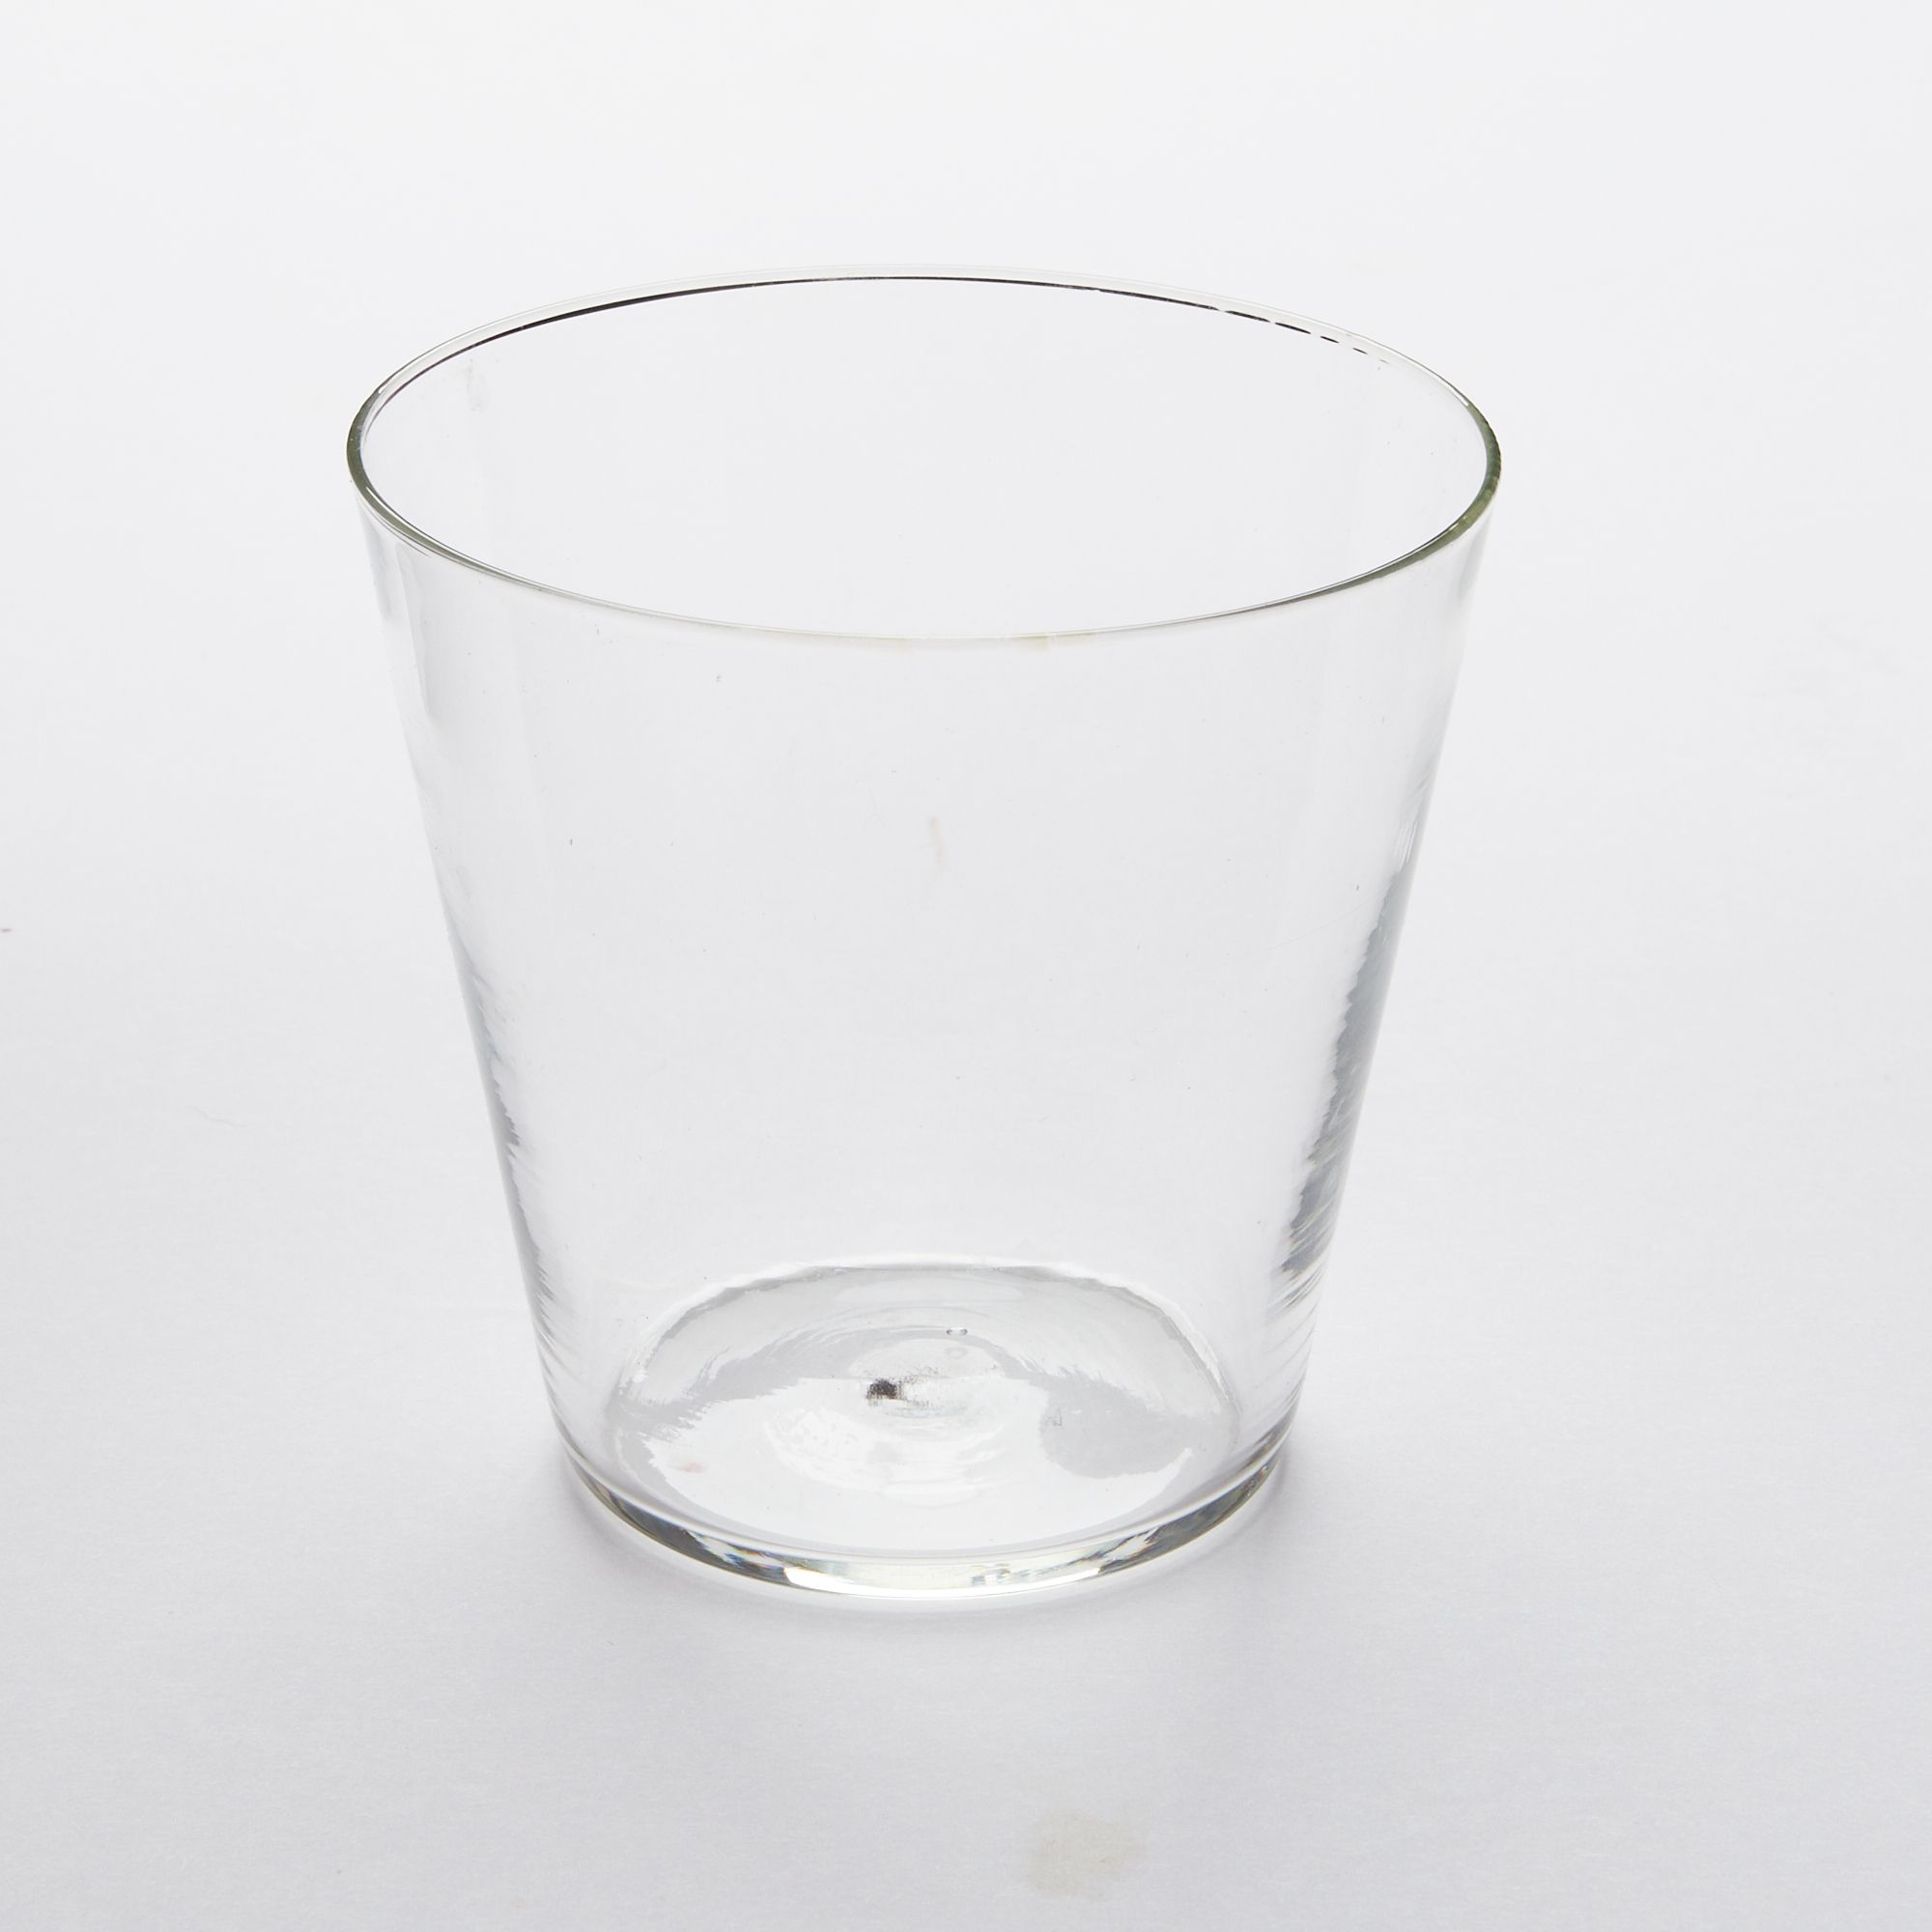 A short drinking glass made of clear glass